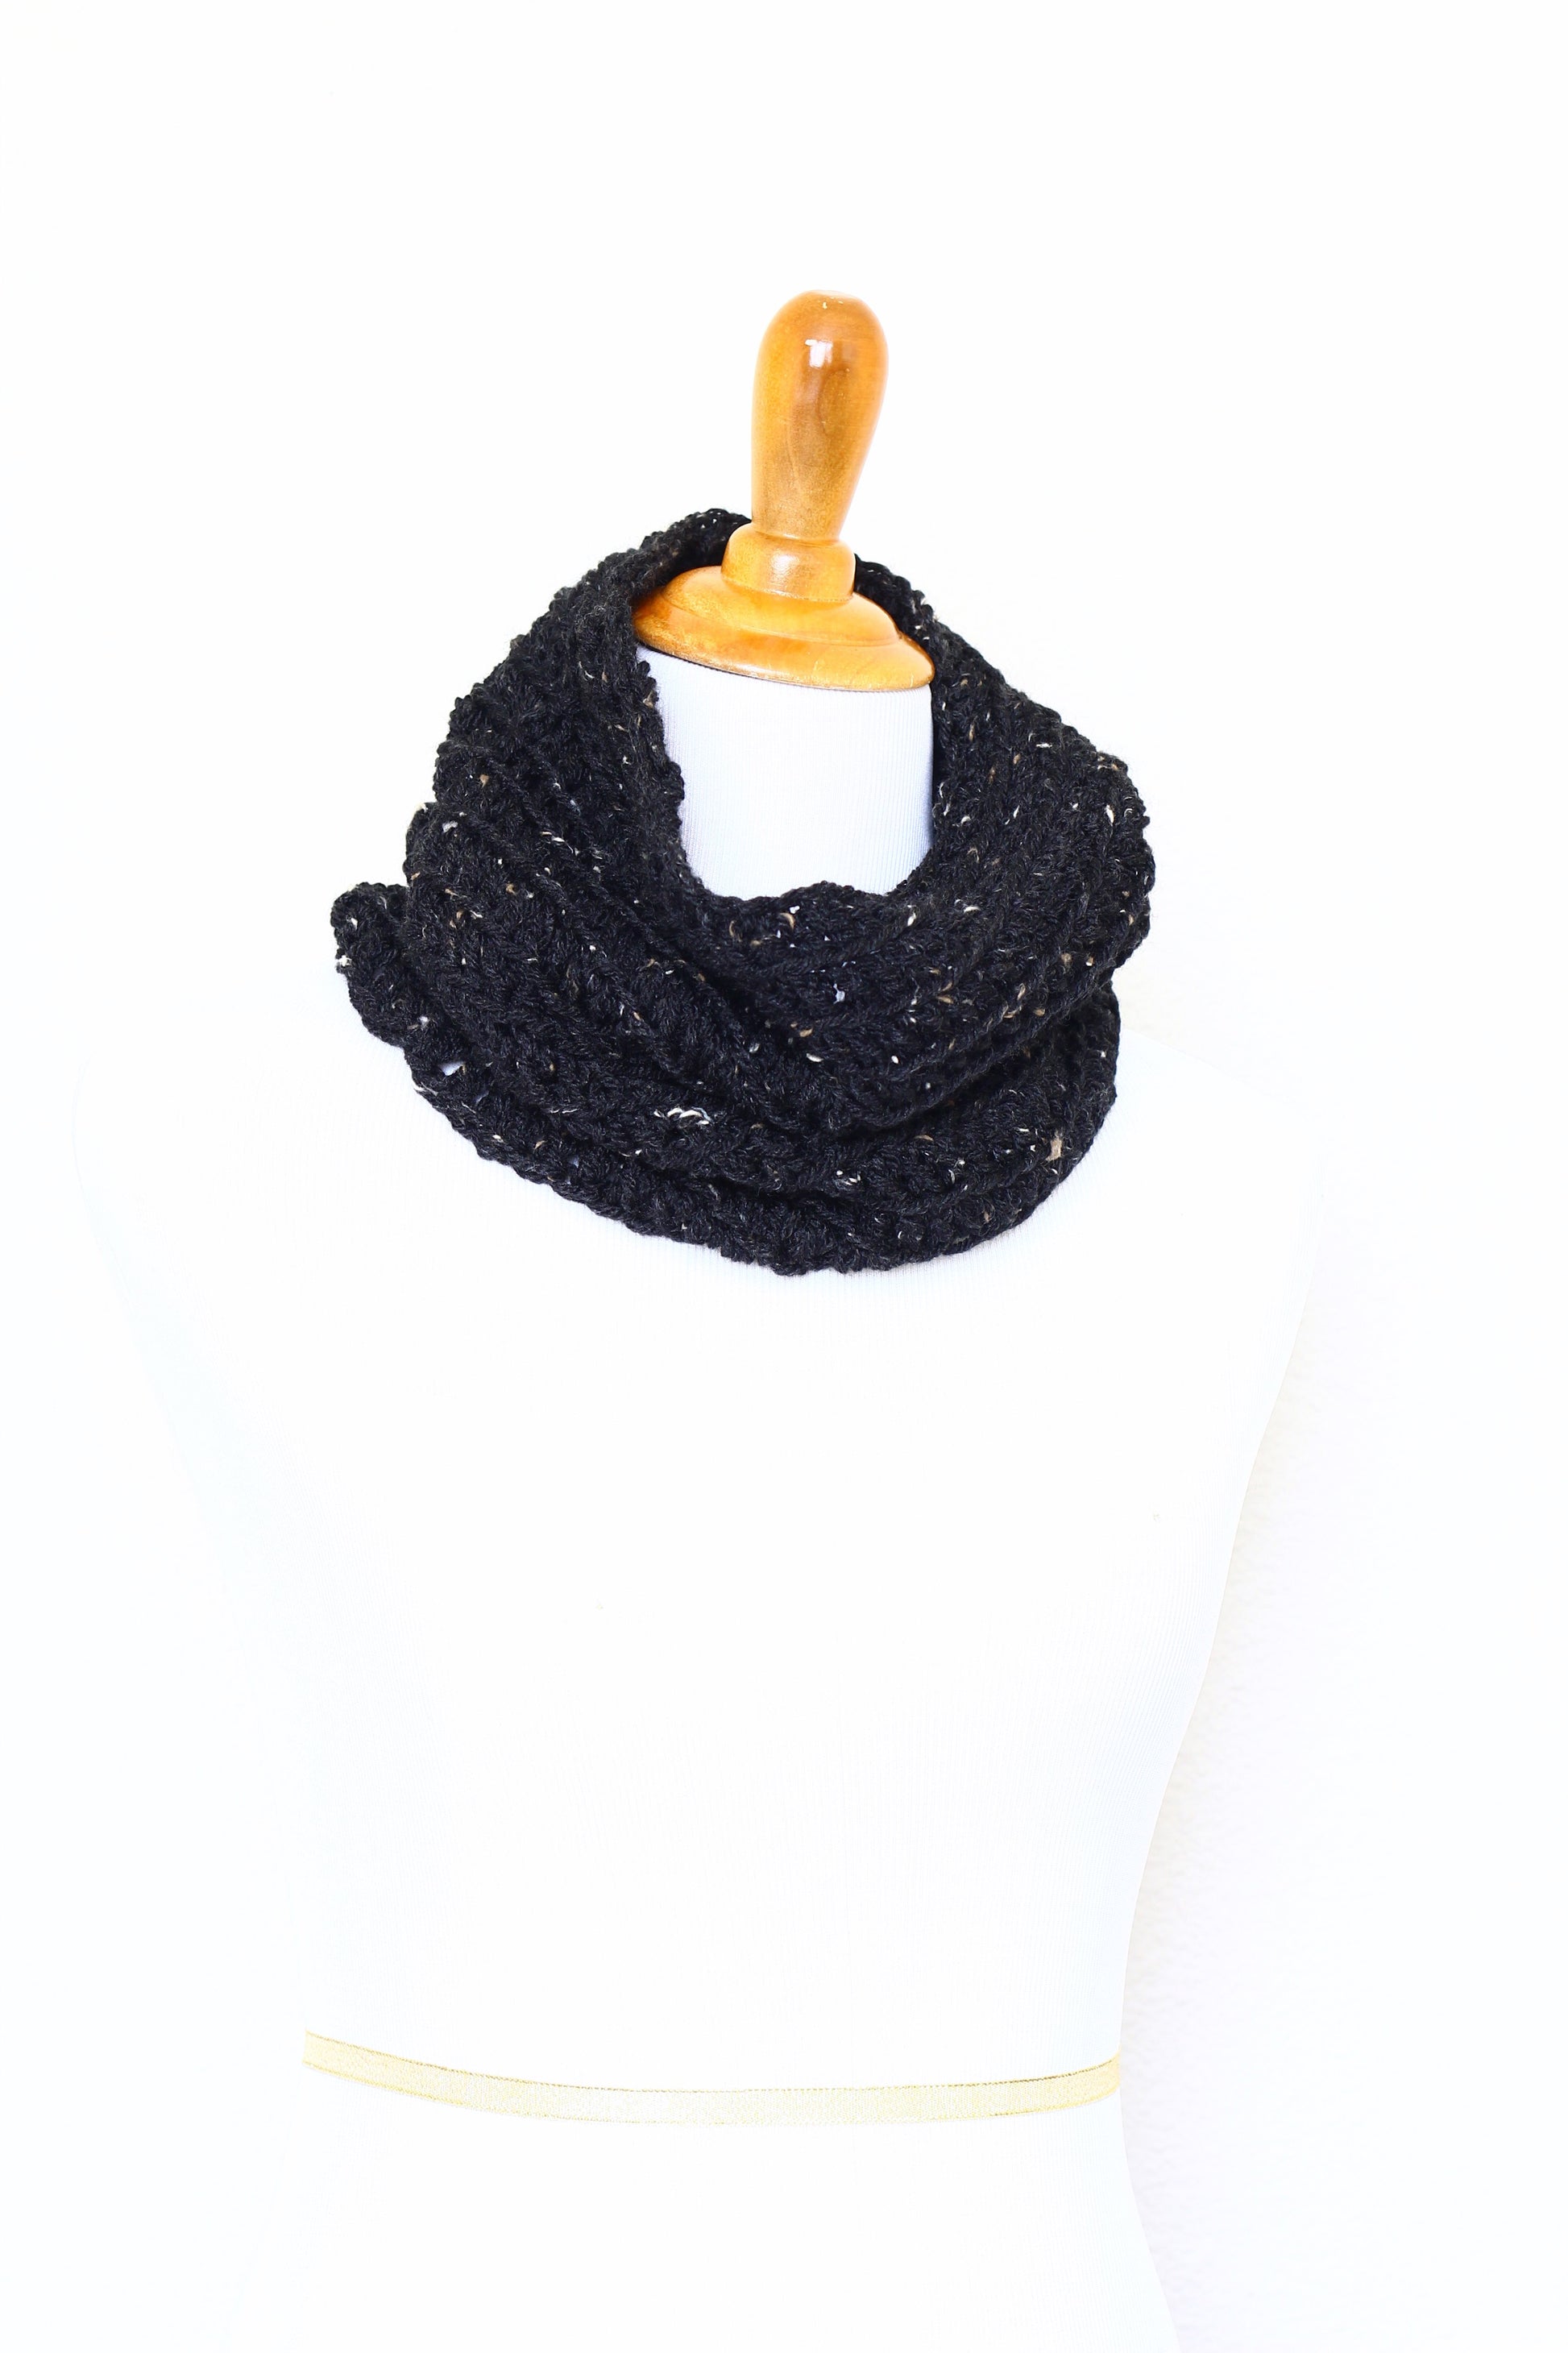 Crochet infinity scarf in graphite color, chunky cowl - 12 colors available